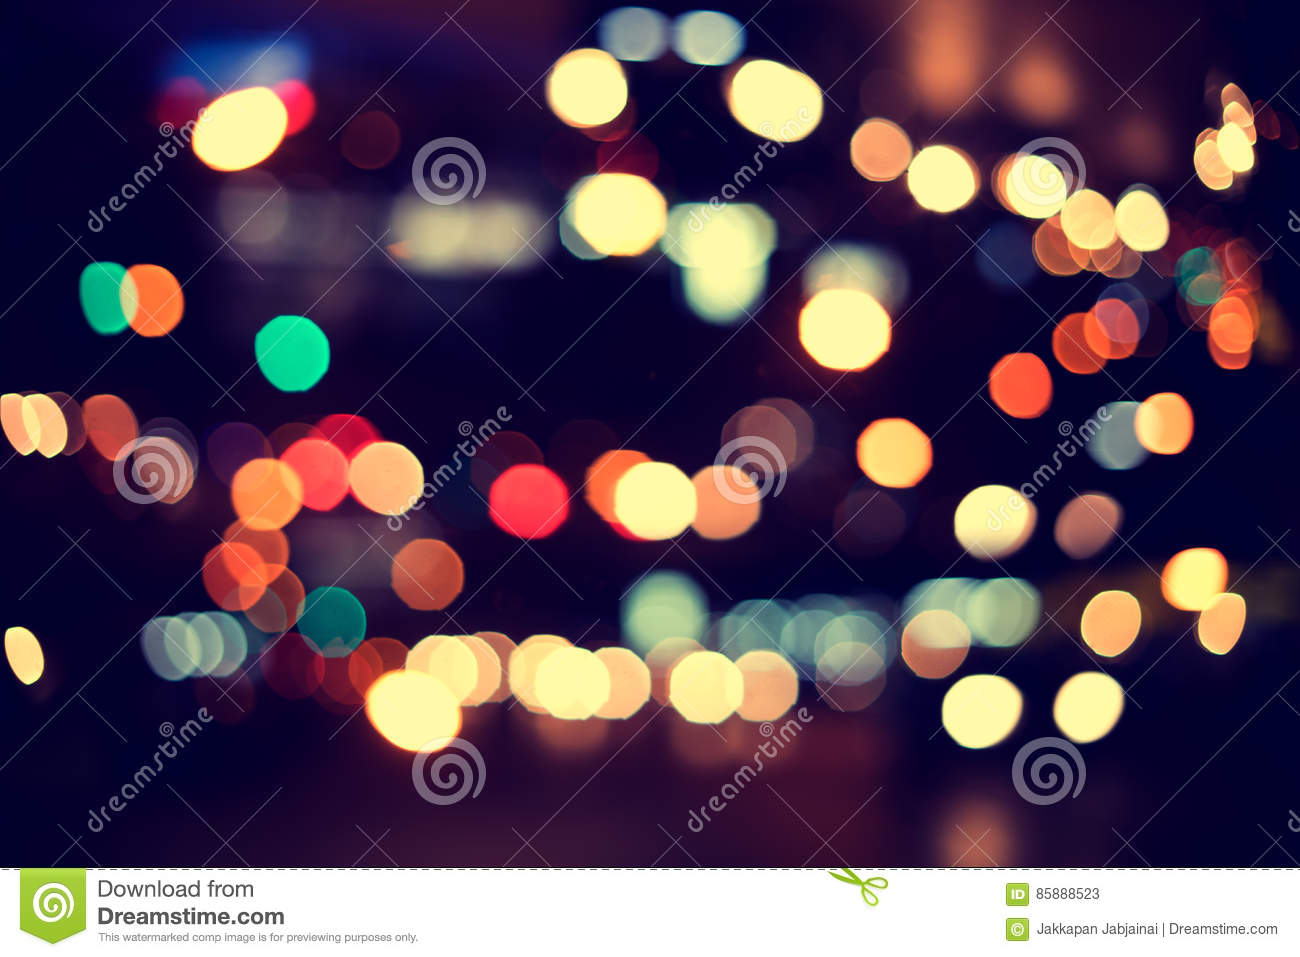 Christmas Lights Stock Image Image Of Circular Light 85888523 in dimensions 1300 X 957